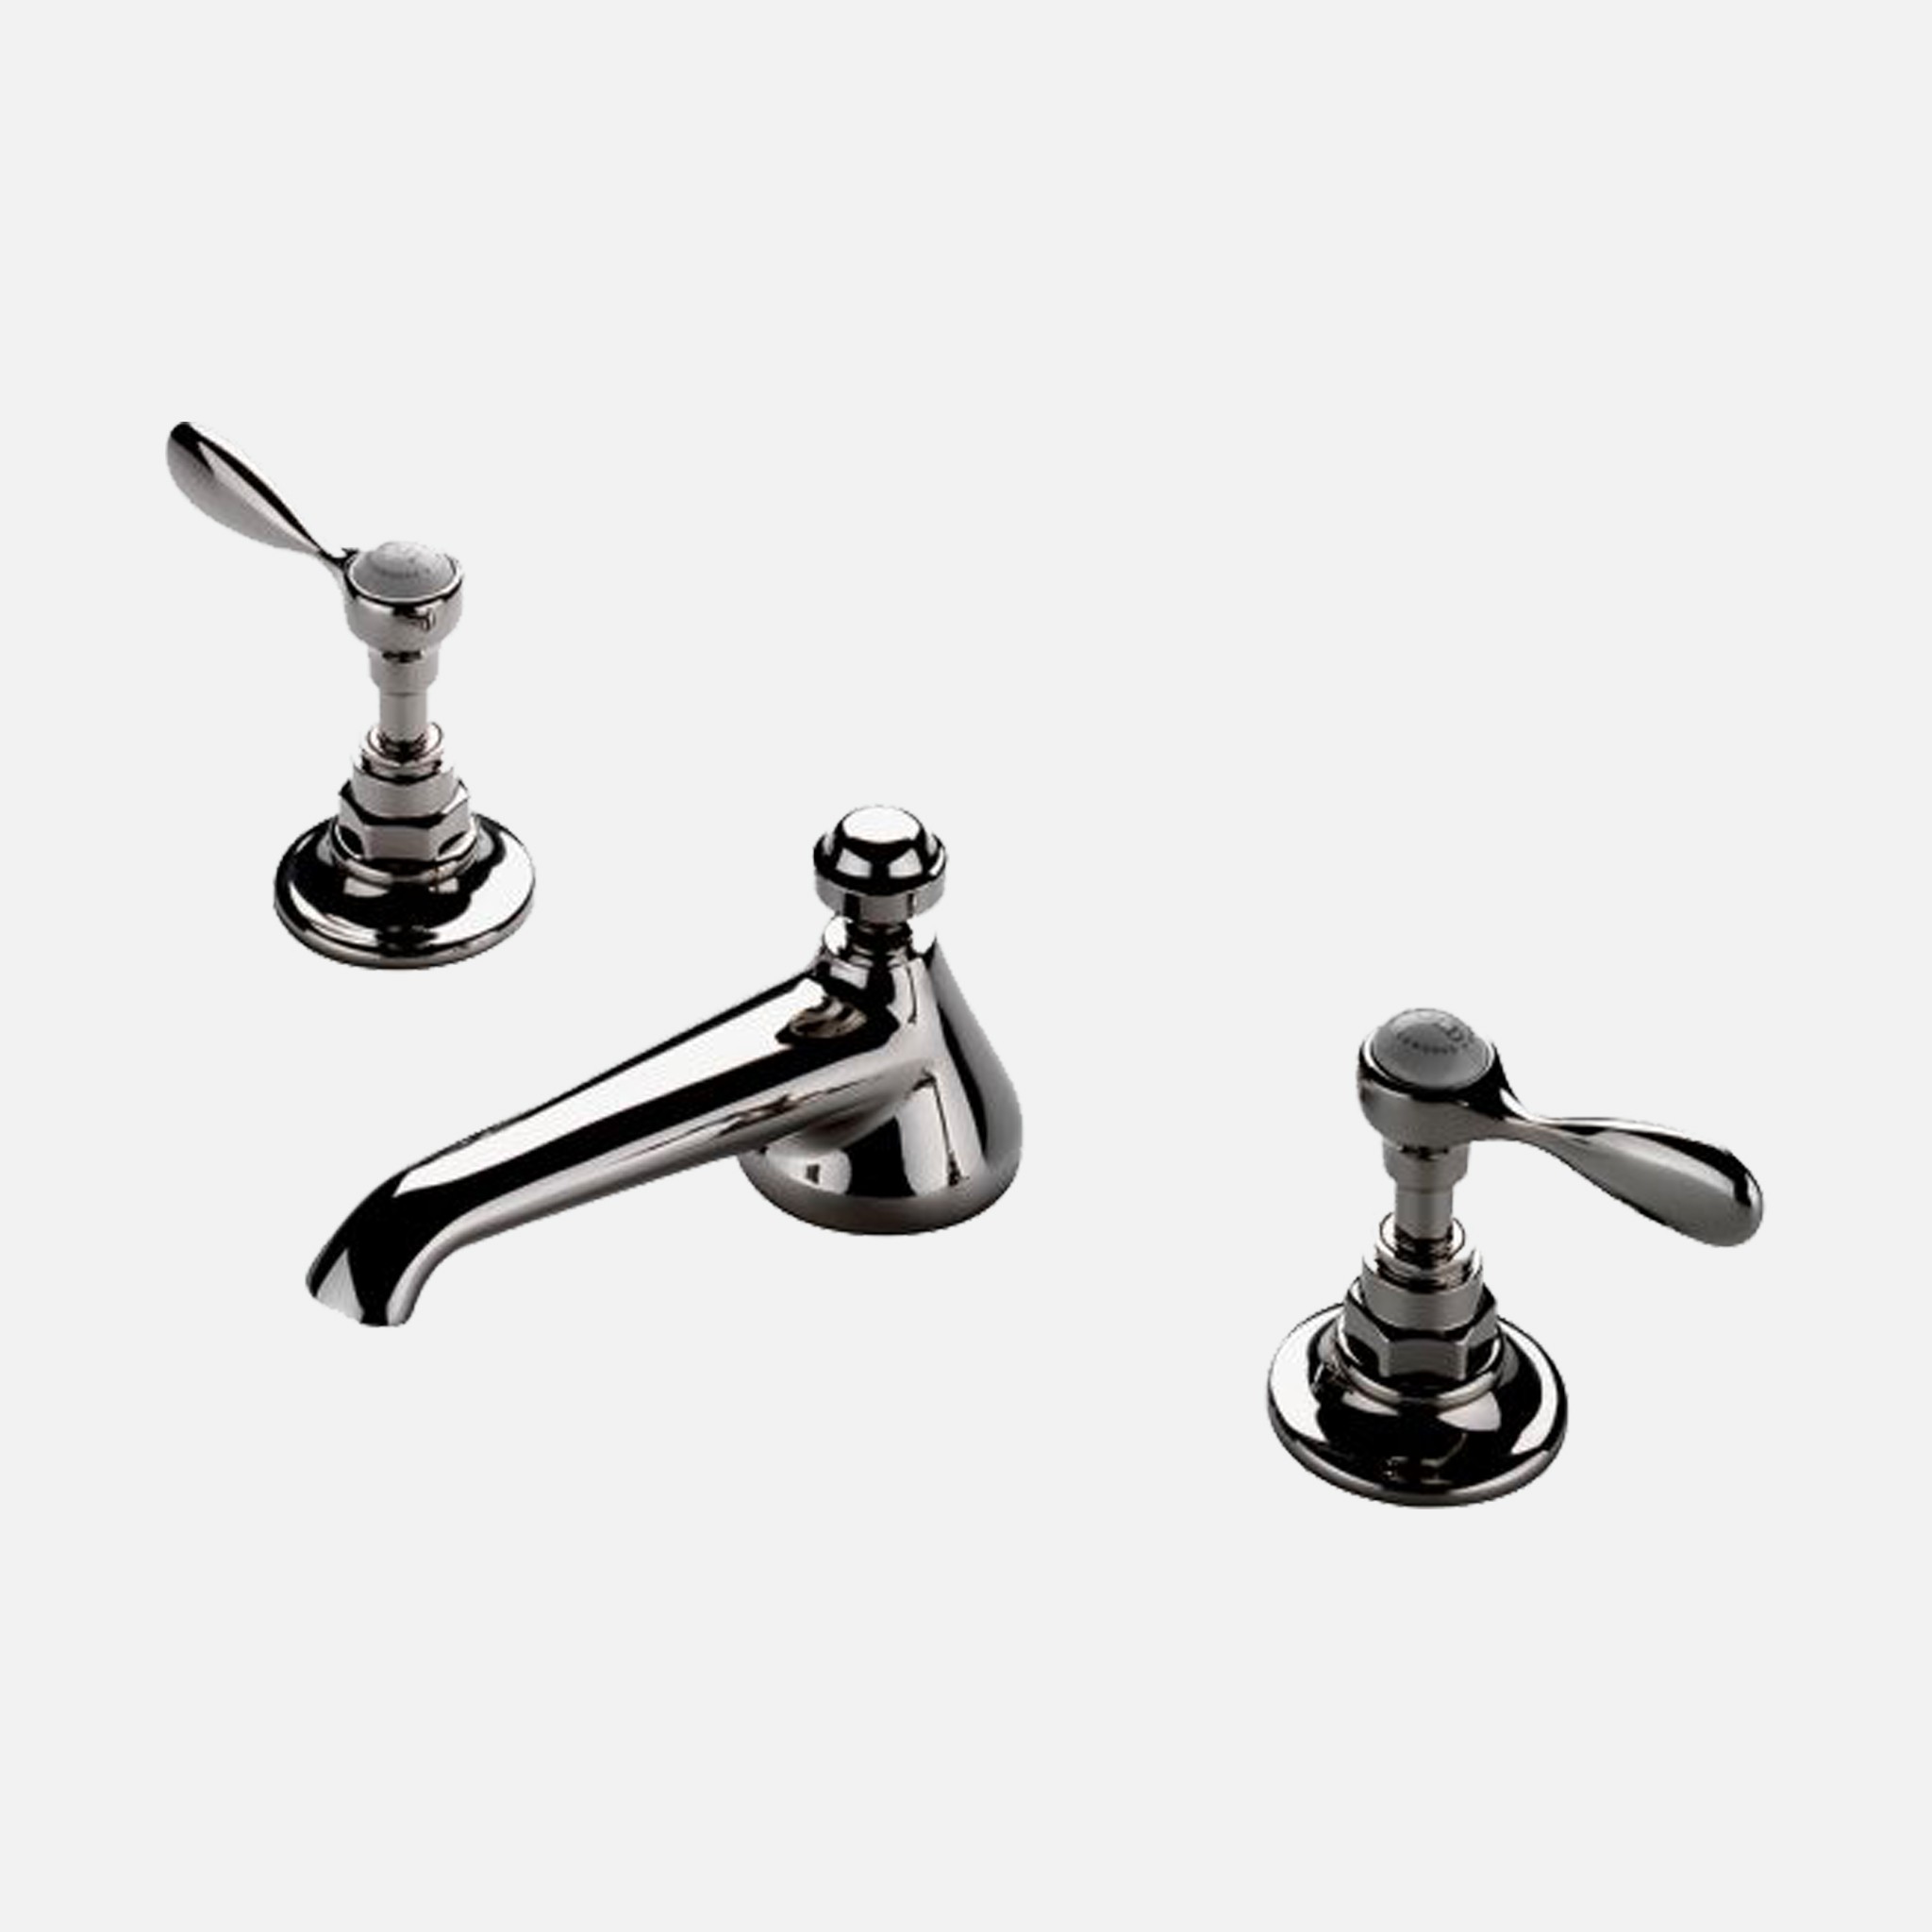 The image of an Waterworks Easton Faucet product